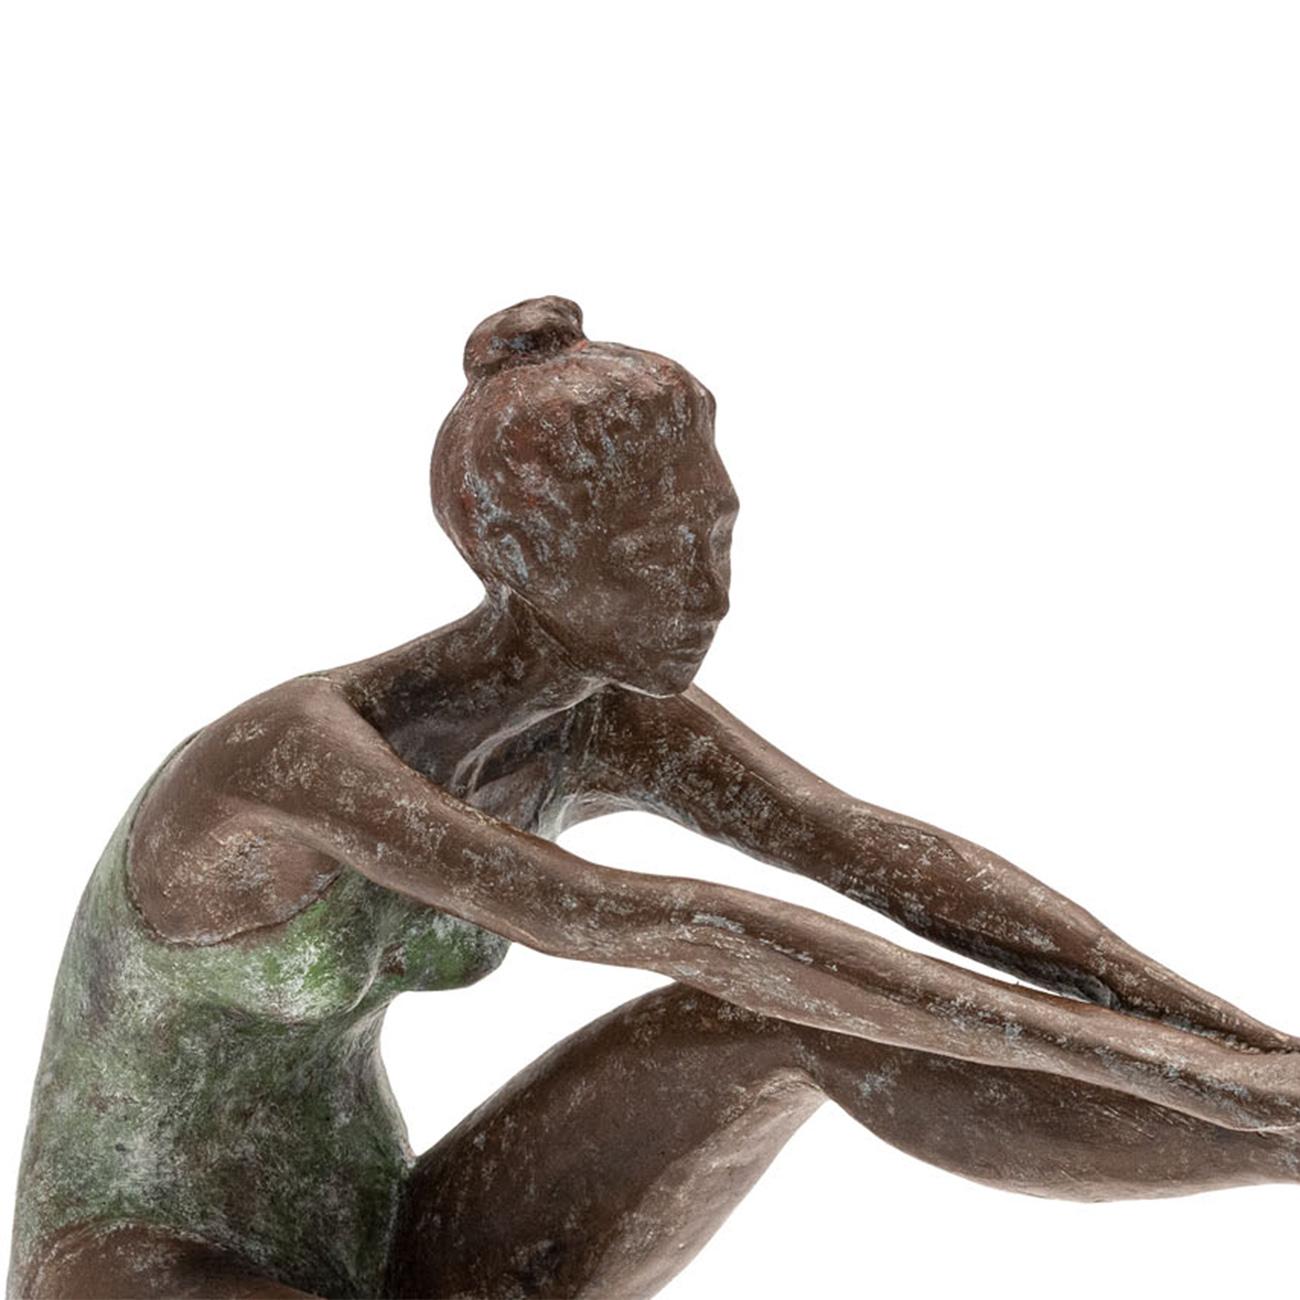 Sculpture Adagio Bronze all in solid bronze
in green finish and natural finish.